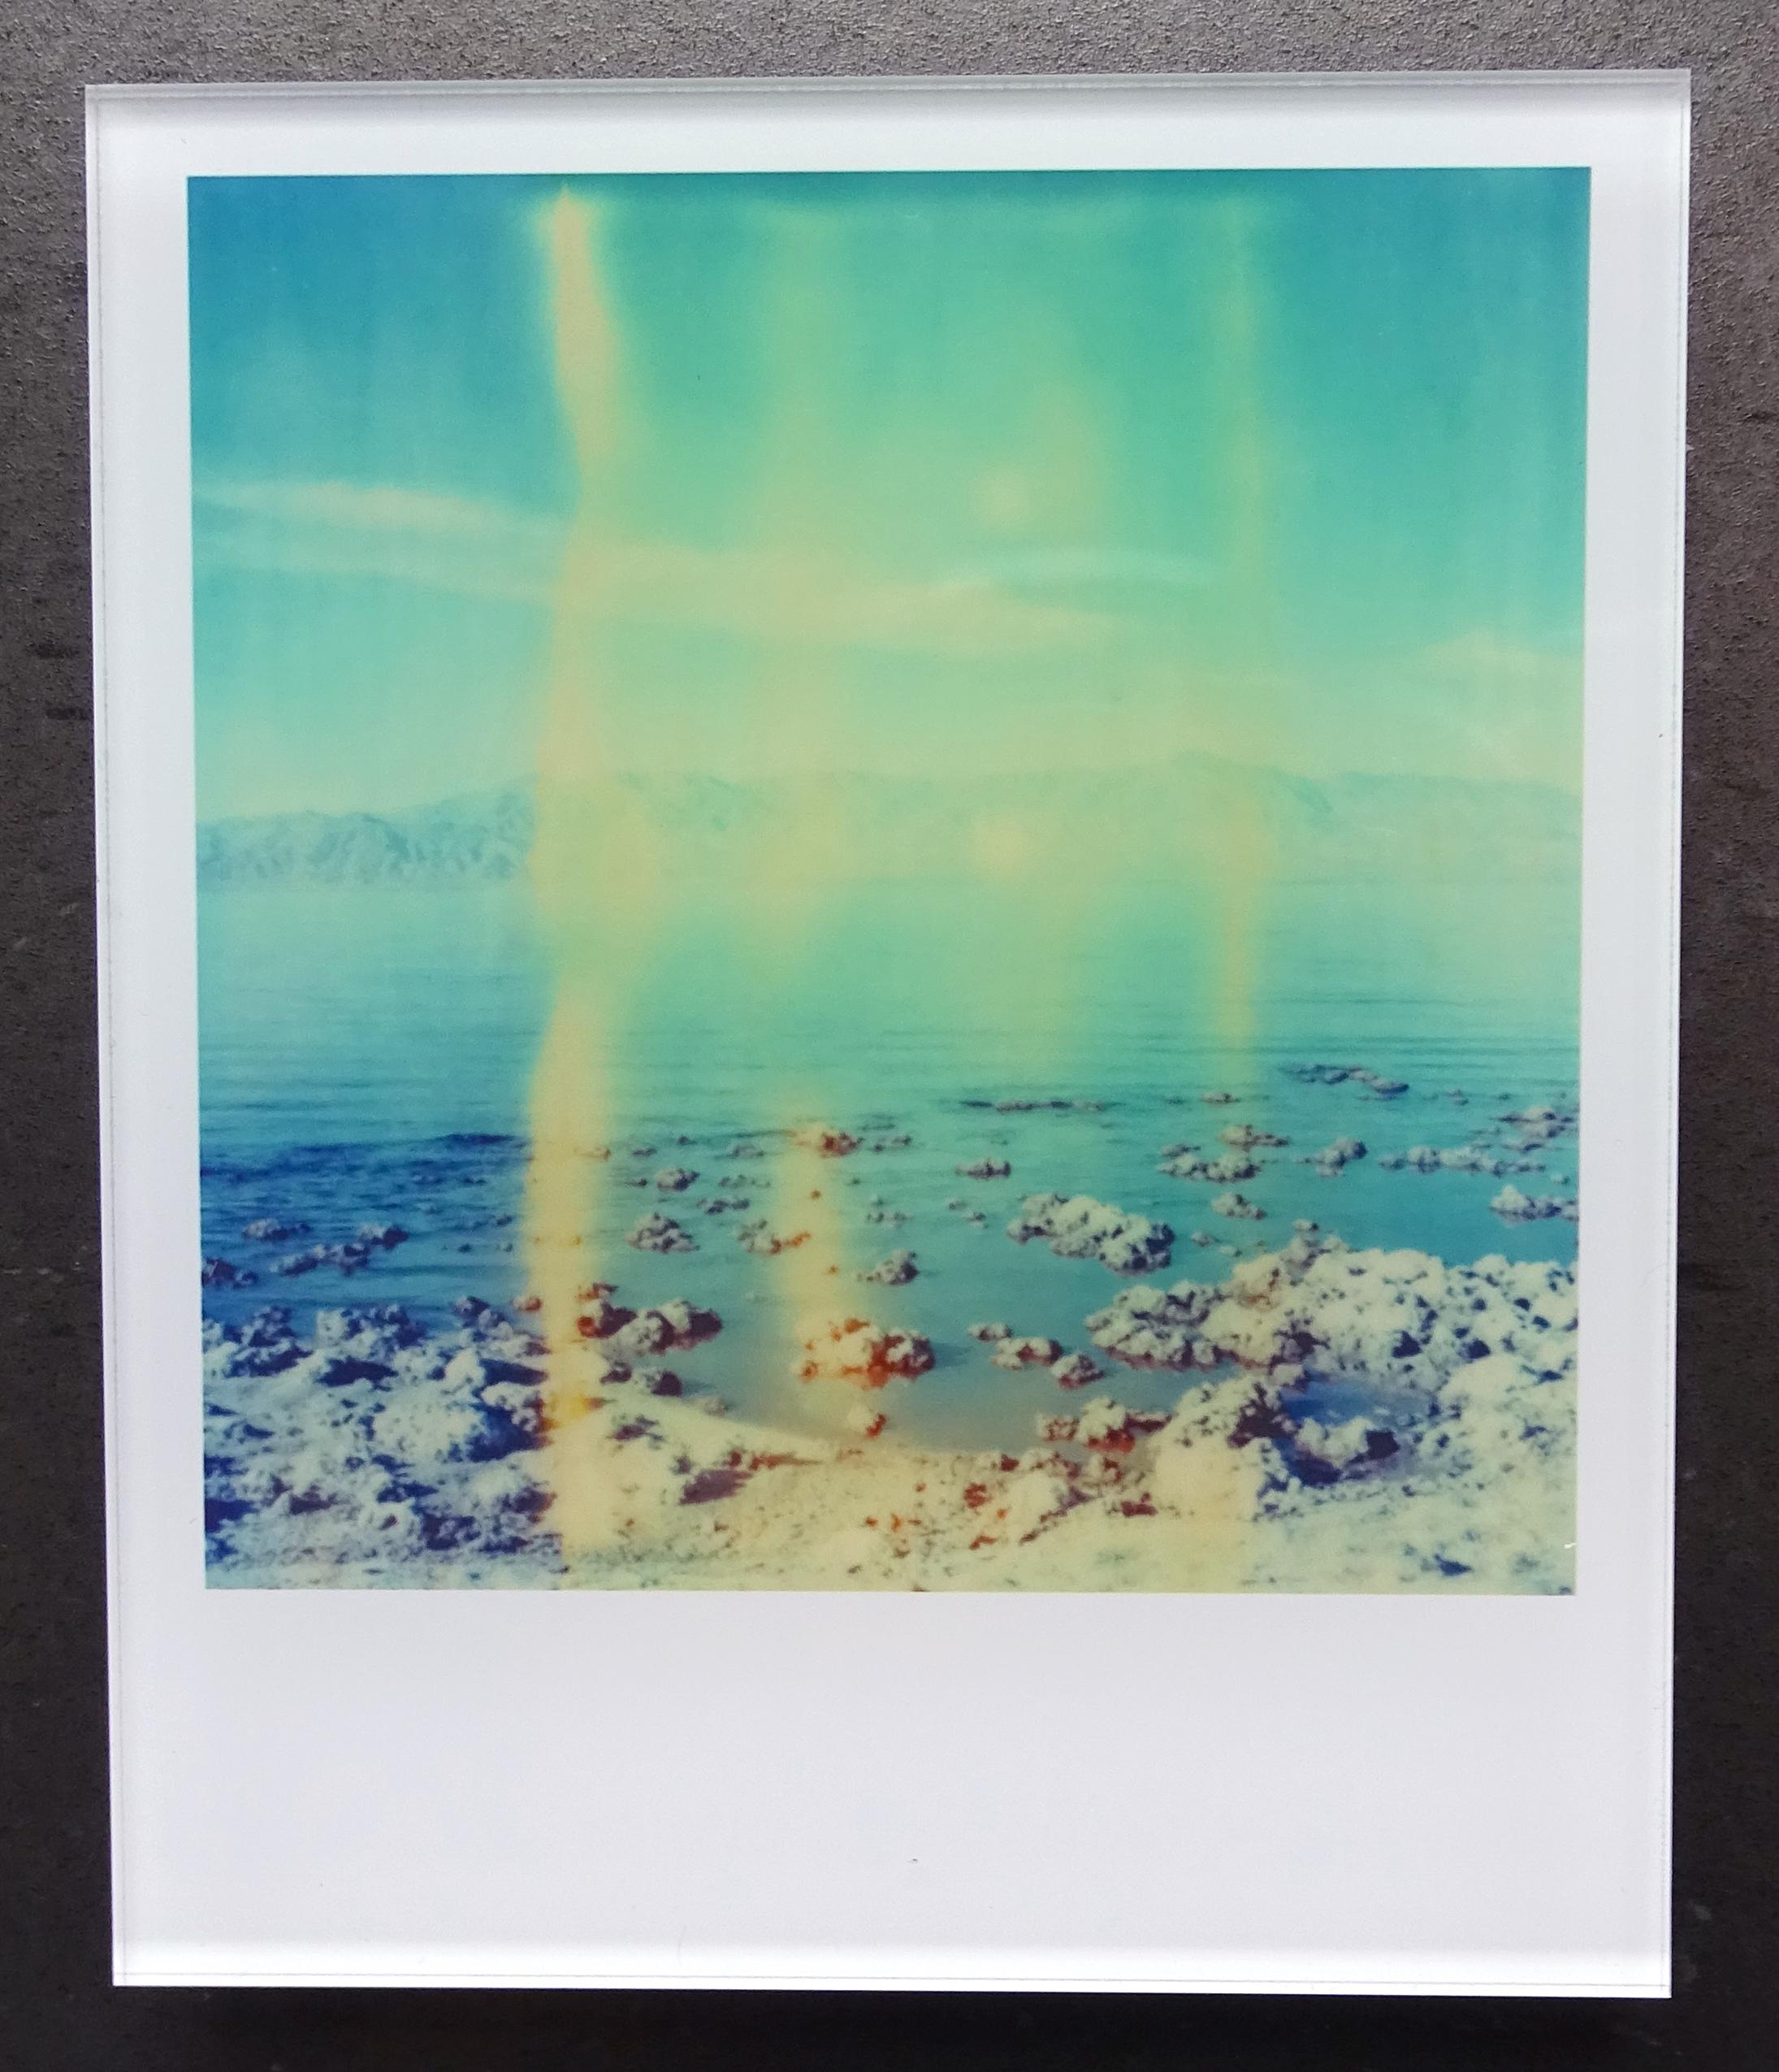 Stefanie Schneider's Minis
Salt and Sea (California Badlands) - 2010

Signed and signature brand on verso.
Lambda digital Color Photographs based on a Polaroid.
Sandwiched in between Plexiglass (thickness 0.7cm)

Polaroid sized open Editions